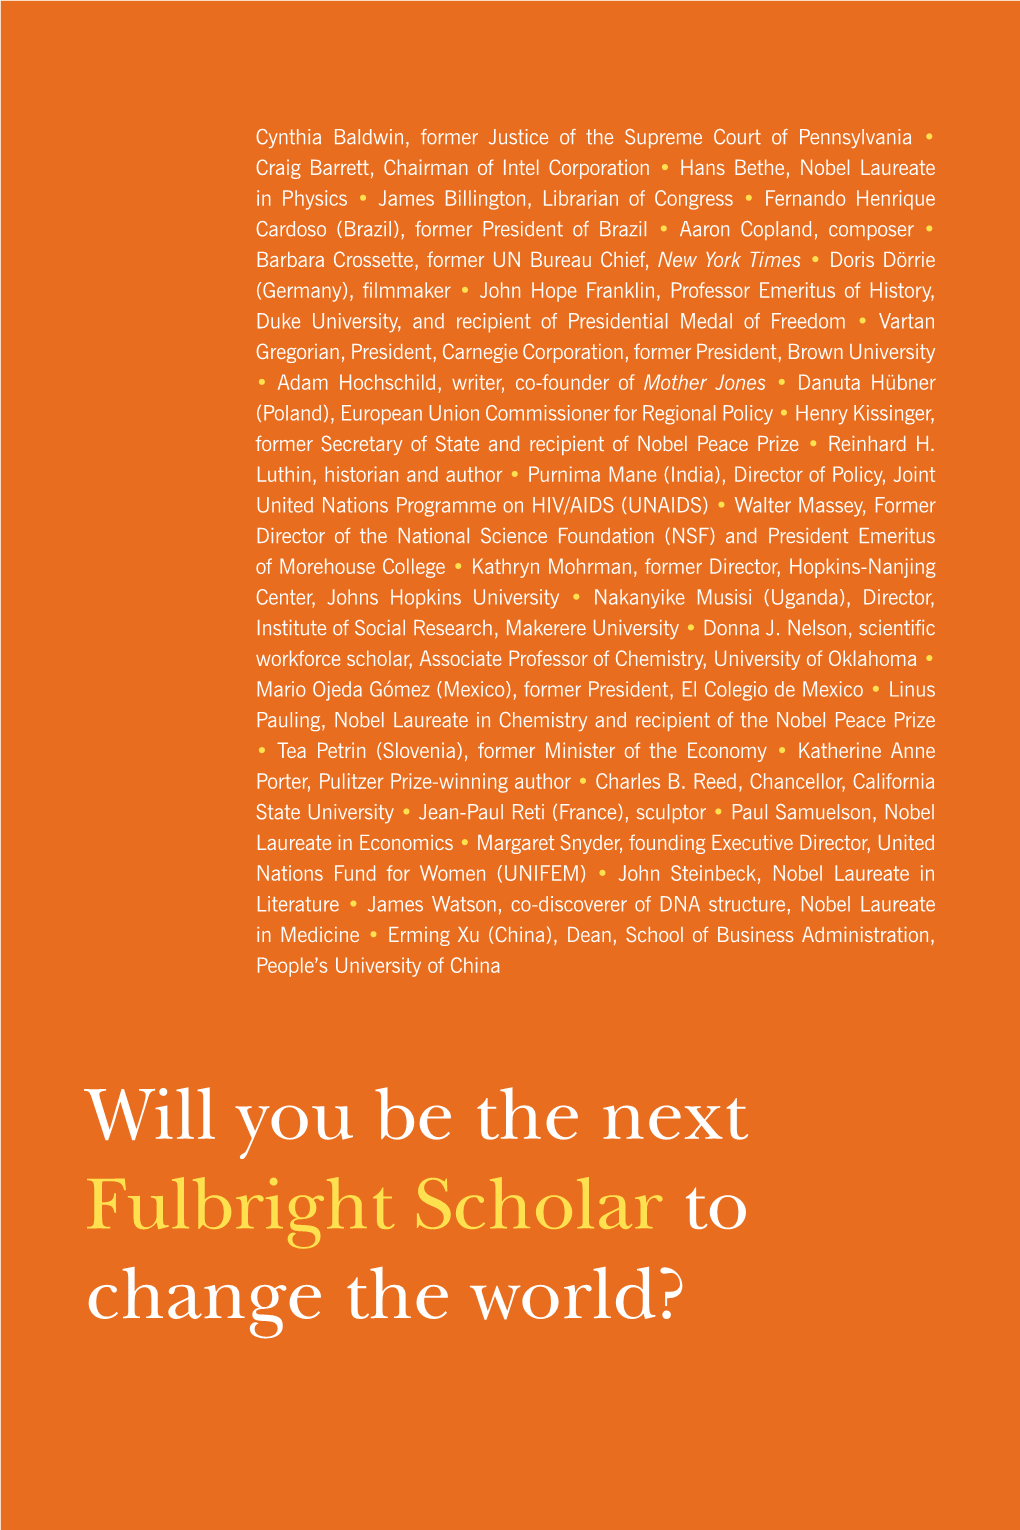 Will You Be the Next Fulbright Scholar to Change the World?